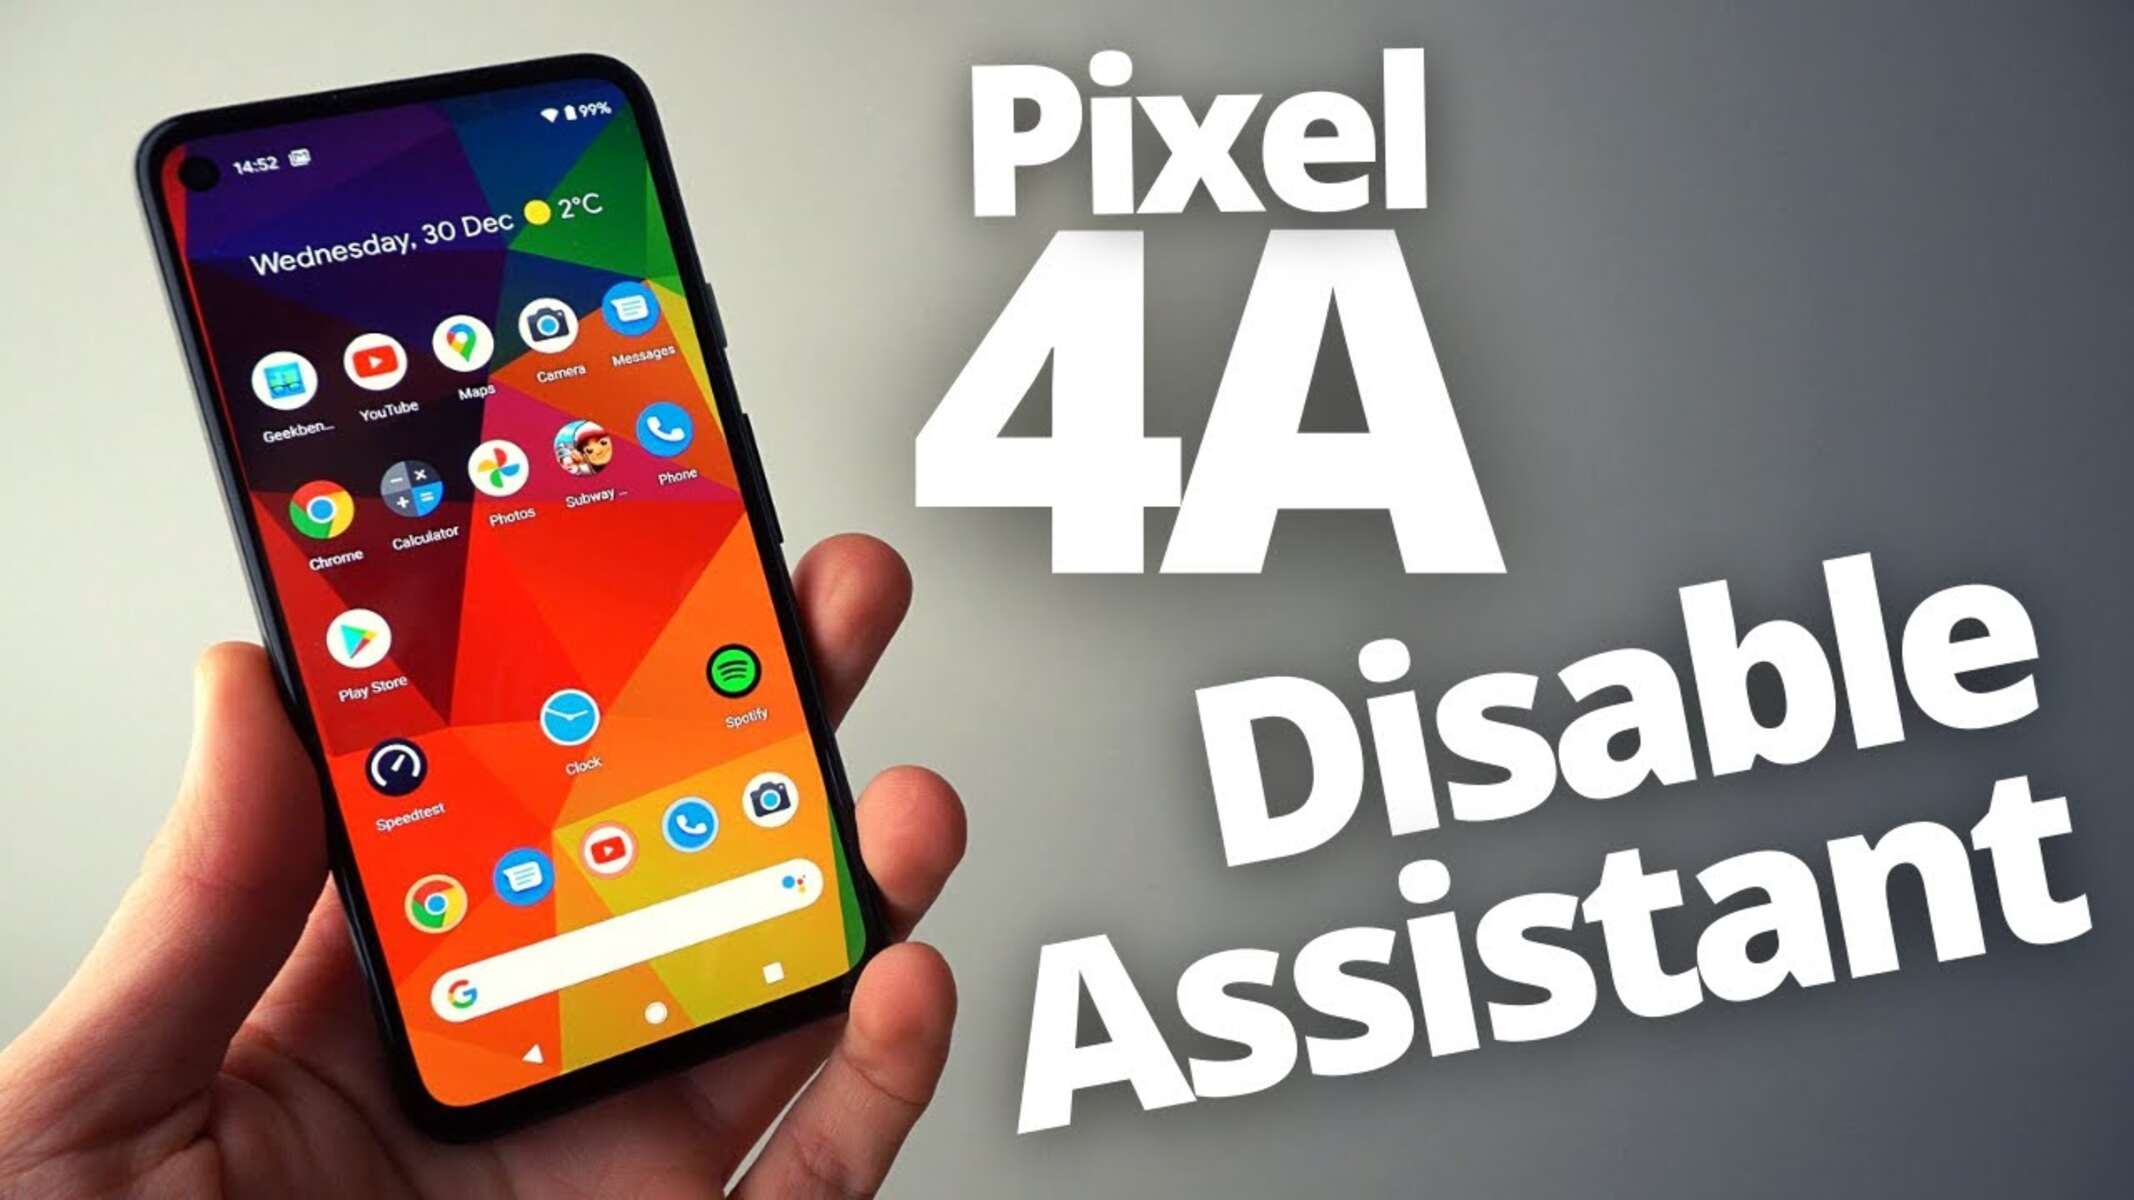 Disabling Google Assistant On Pixel 4A: Easy Steps